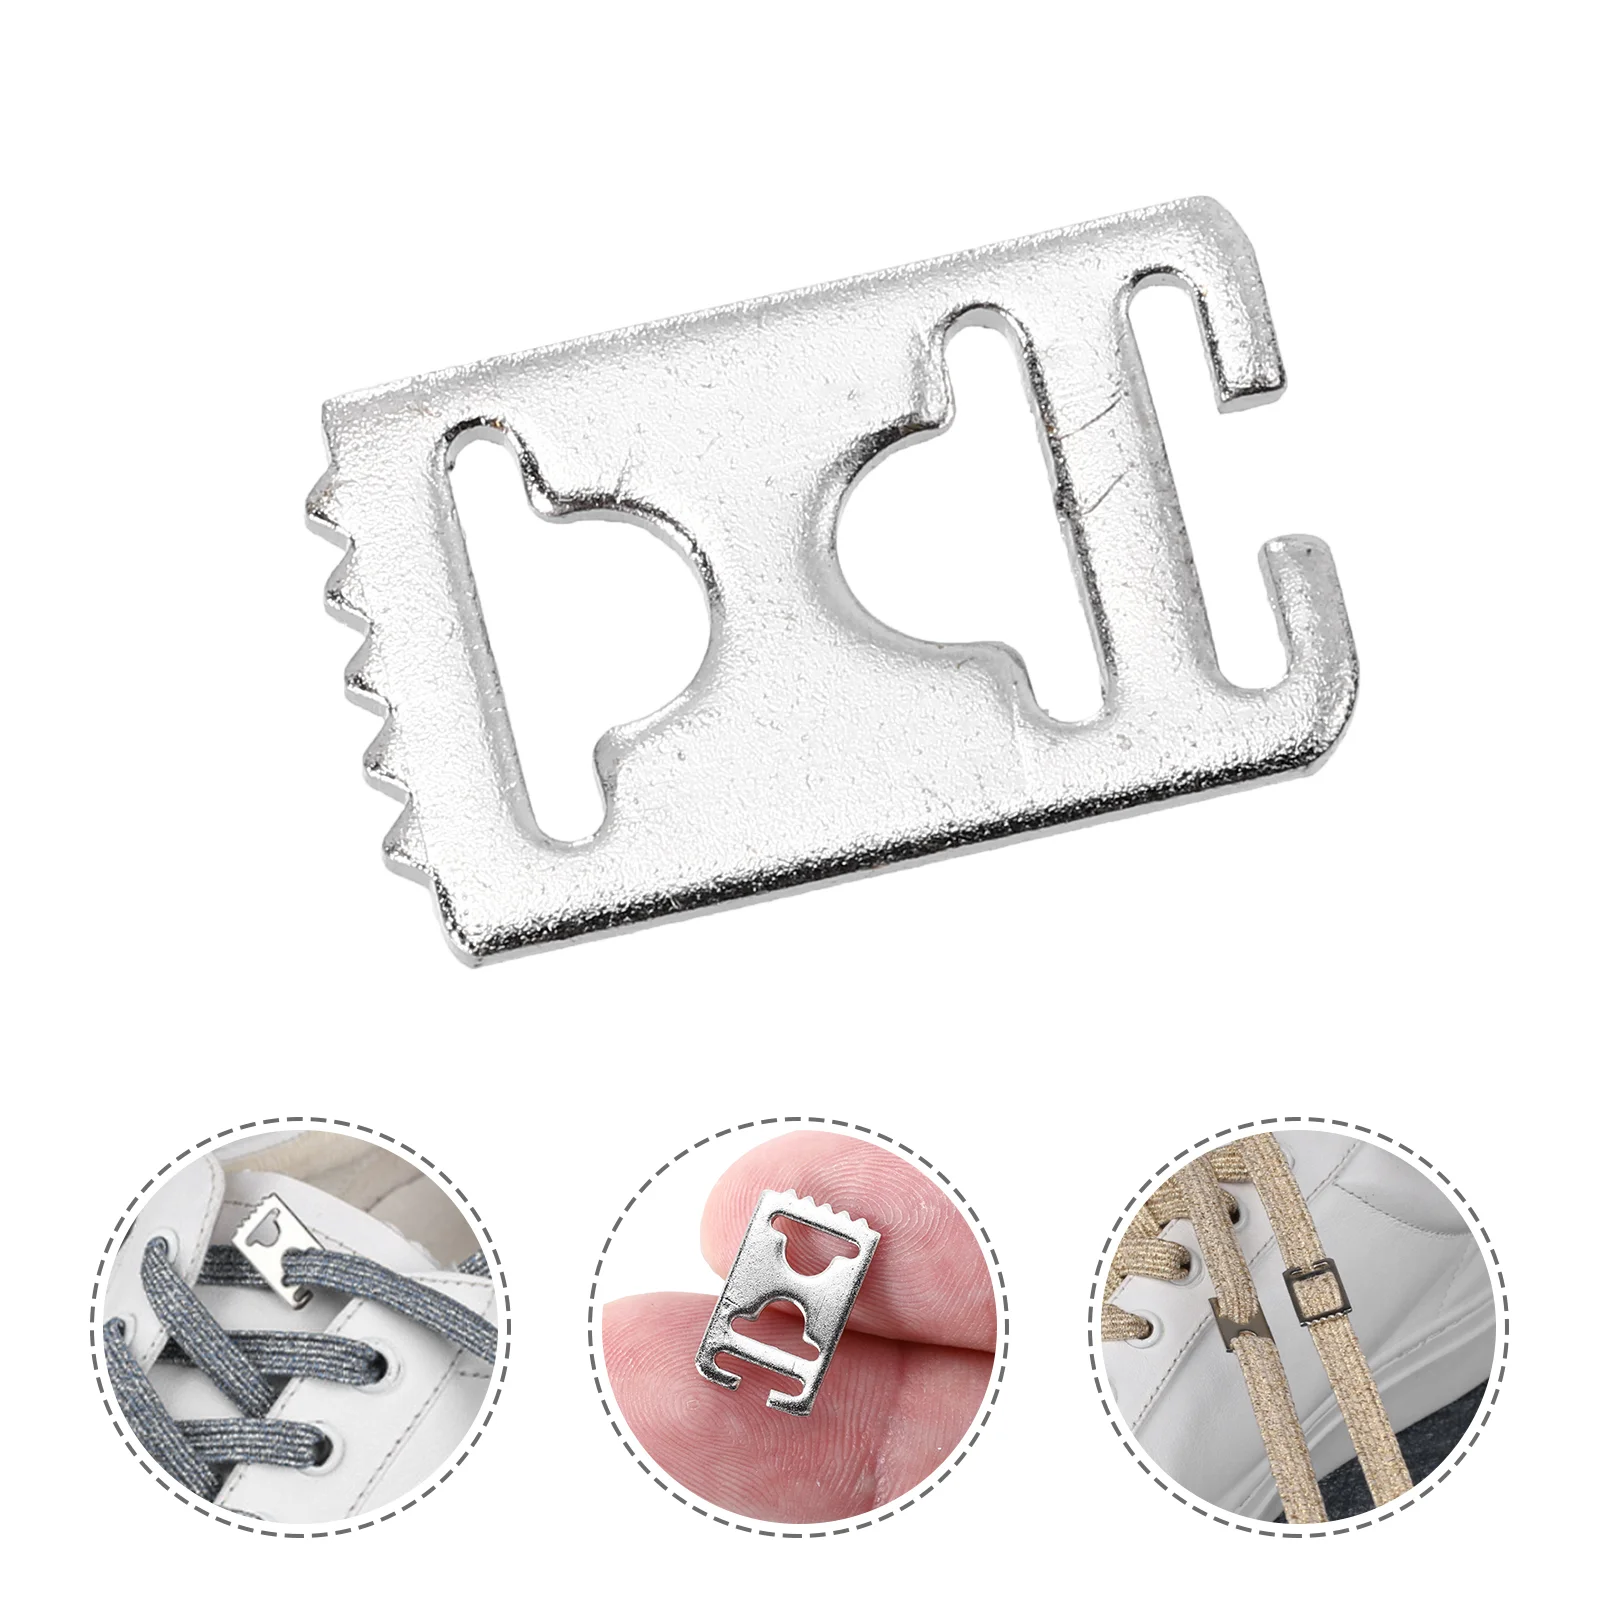 

16 Pcs Lazy Shoe Lace Buckle Laces Flat Buckles Invisible Shoelace Connector Locks Decoration Sneakers Stainless Steel Child